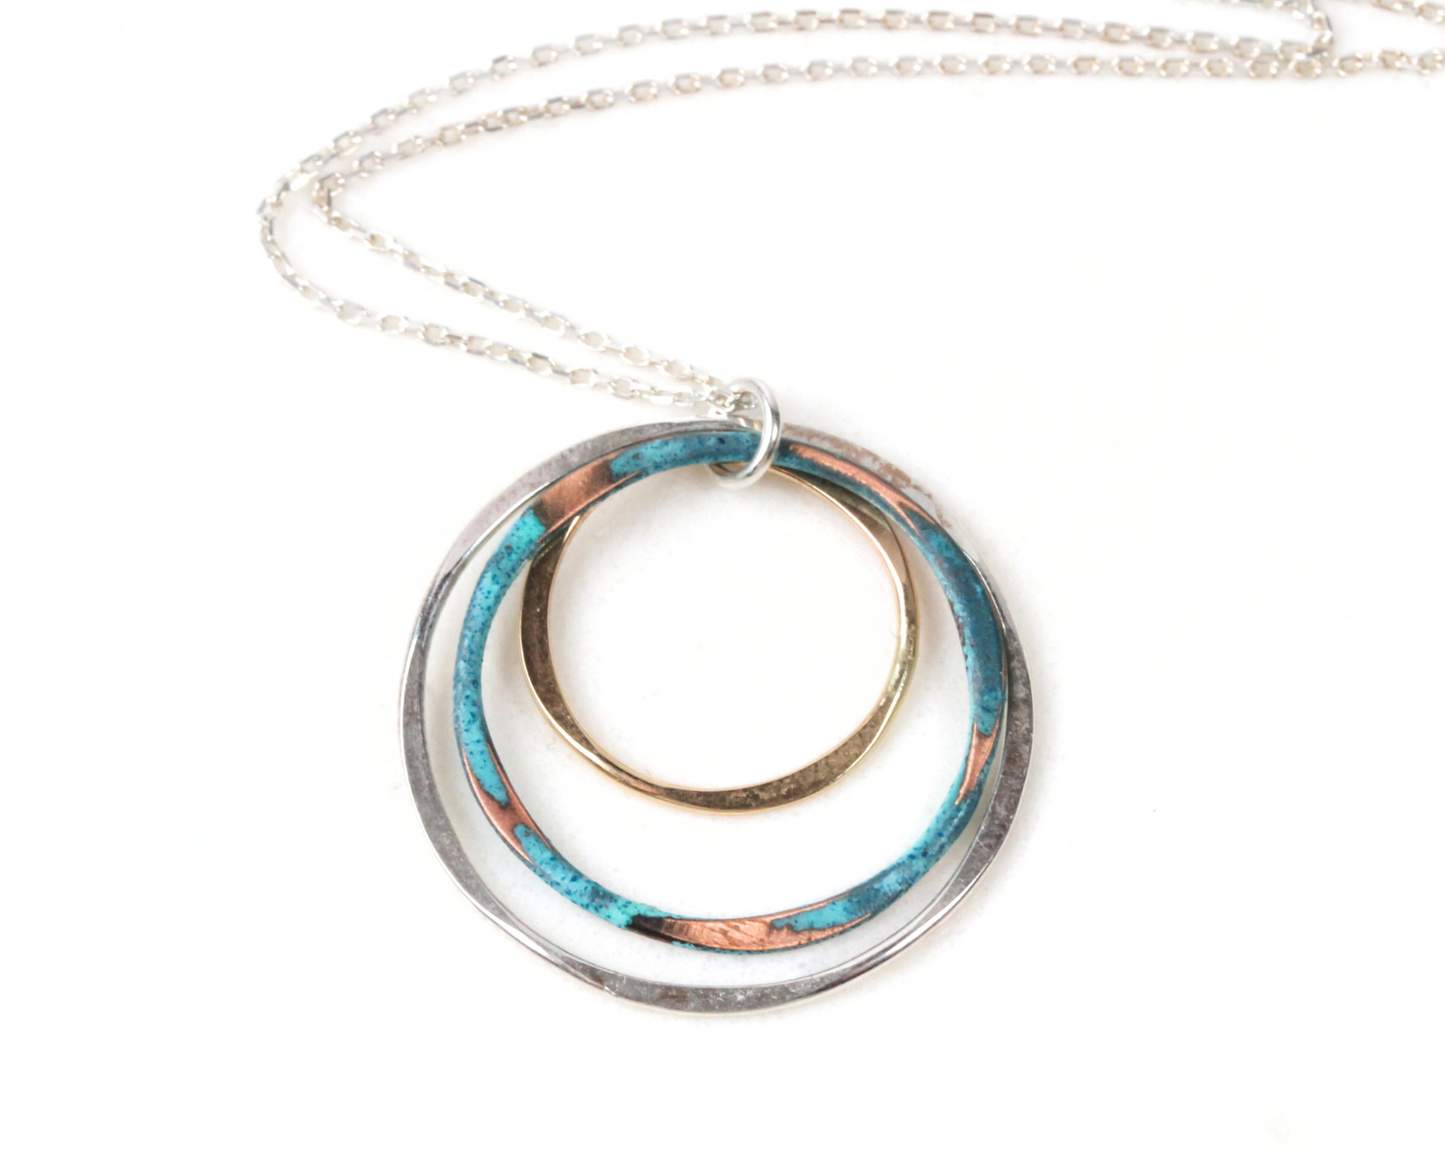 The attention to detail is second to none. With a fierce dedication to quality, each piece in this sweet necklace in handmade from start to finish. Made from elevated materials and our Mint patina, this necklace is both unique and stunning.